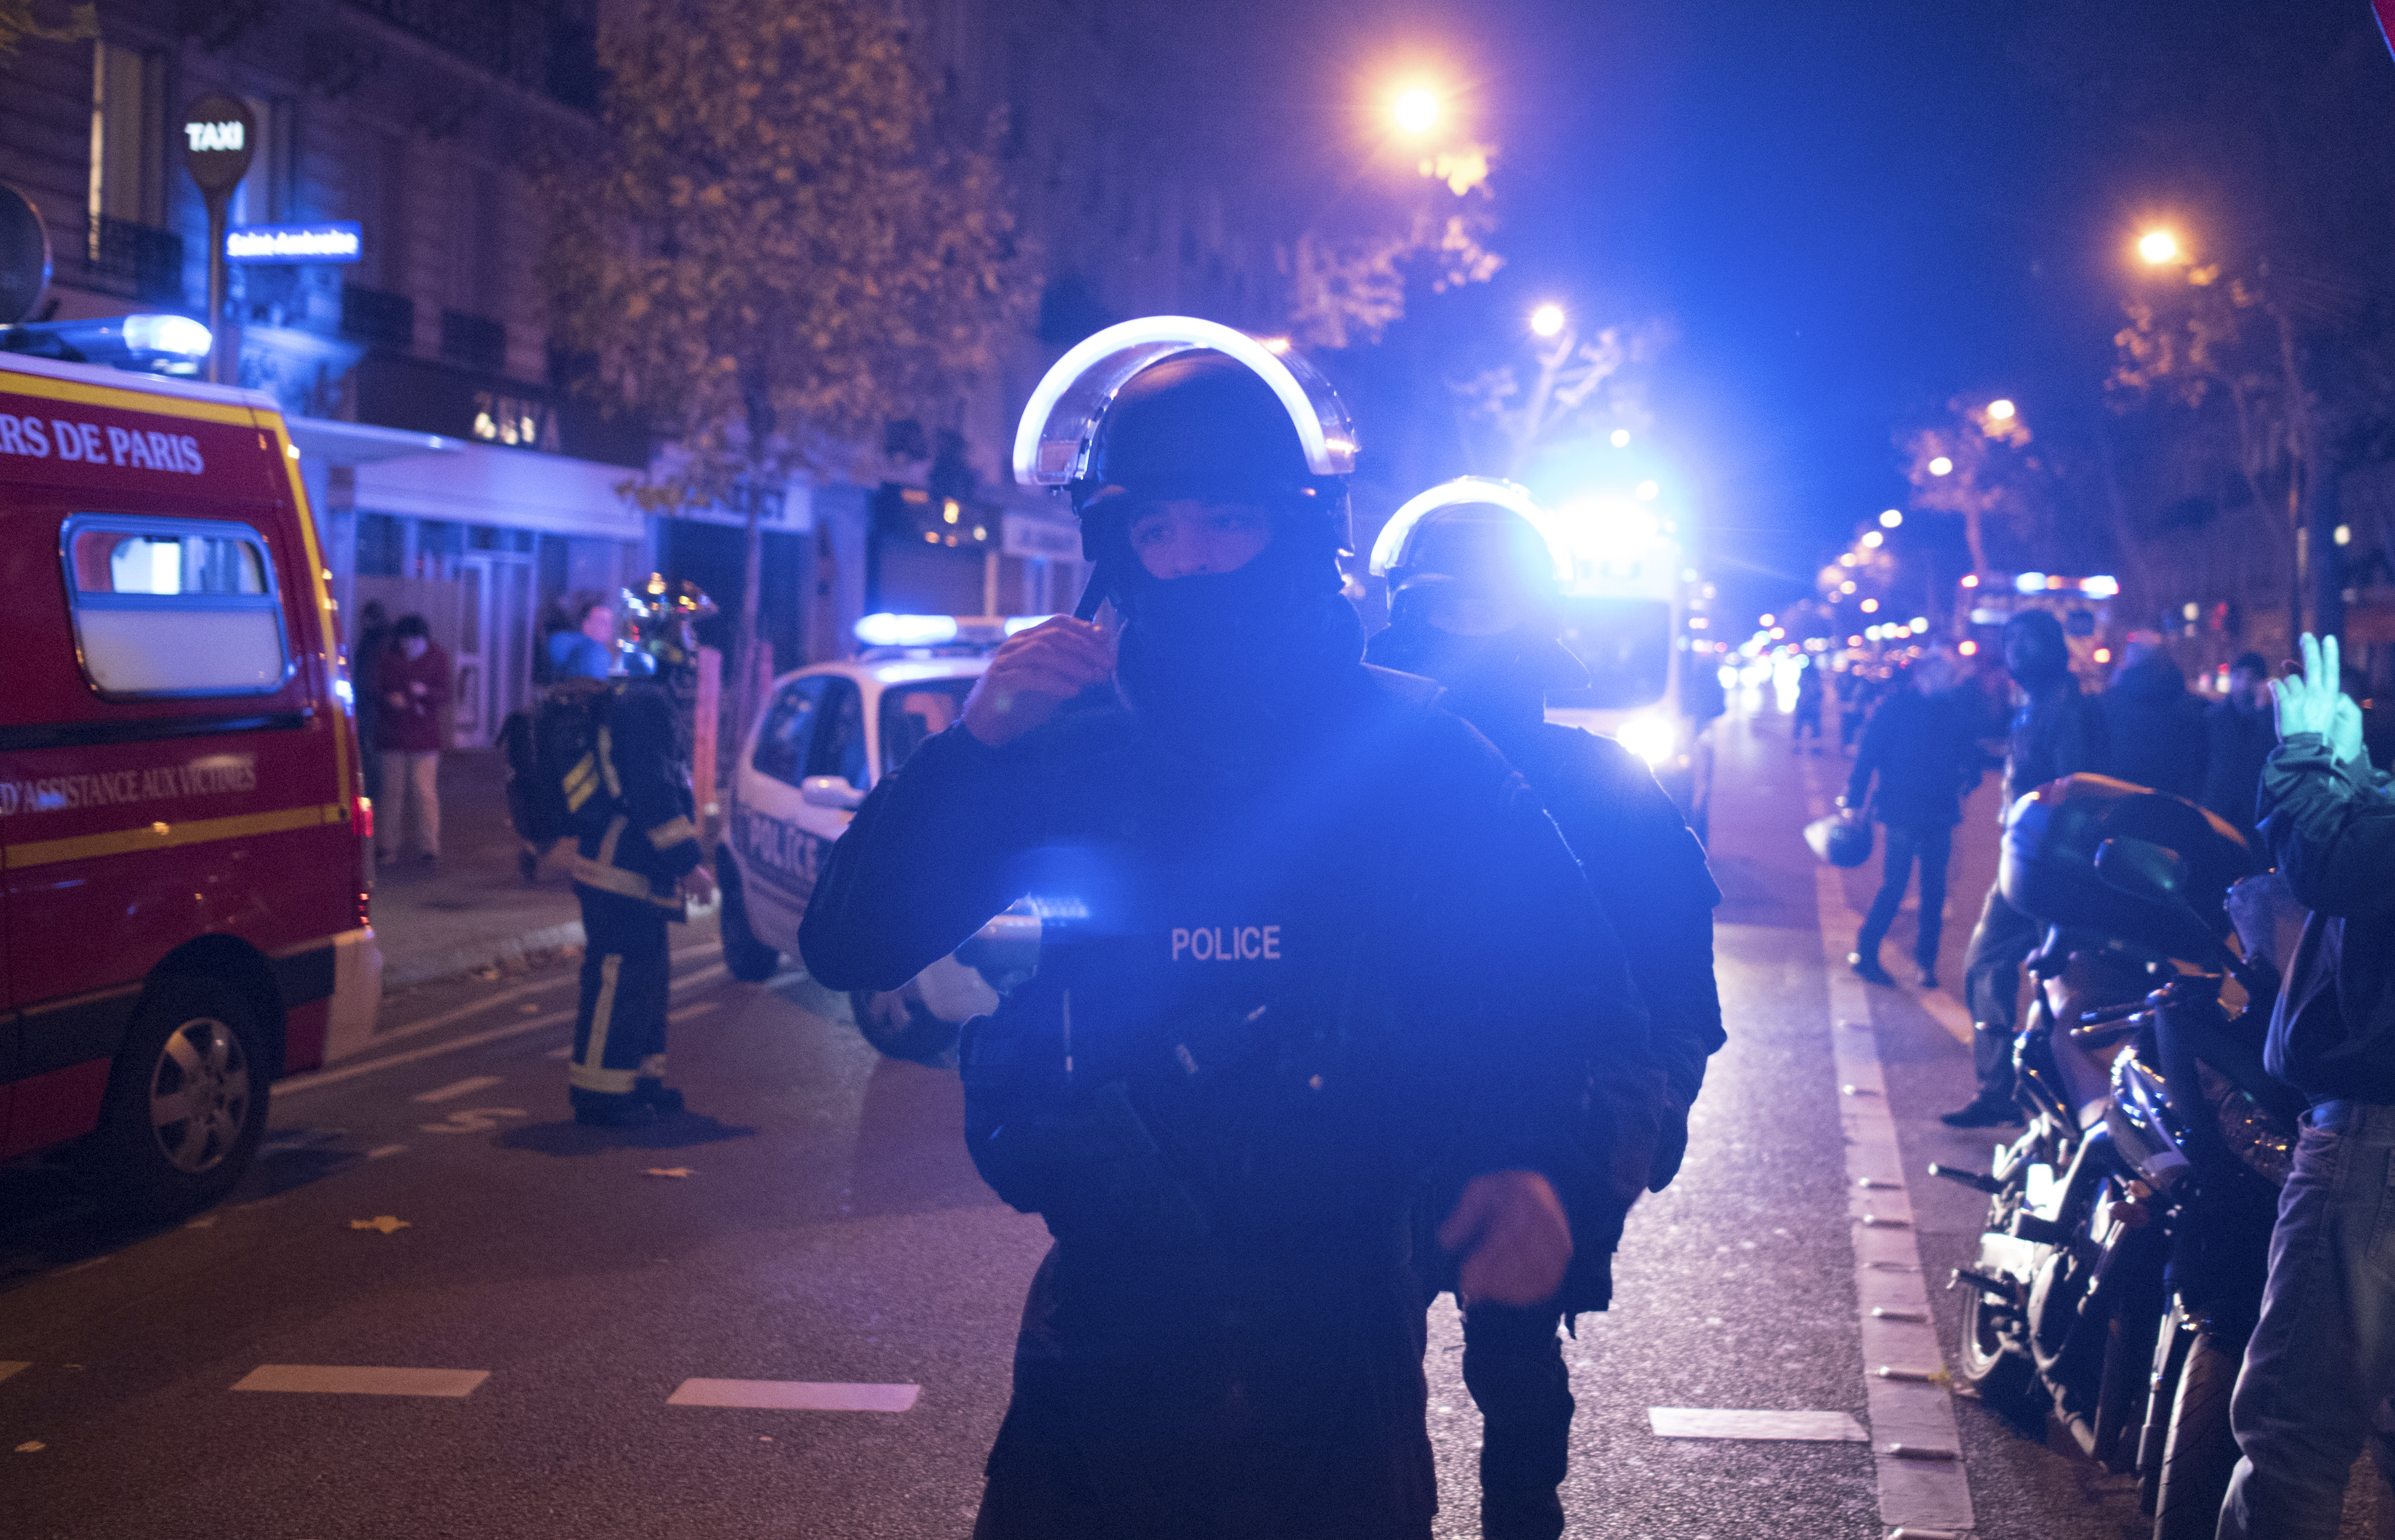 Elite police officers arrive to the Bataclan concert venue after the deadly attacks in Paris.